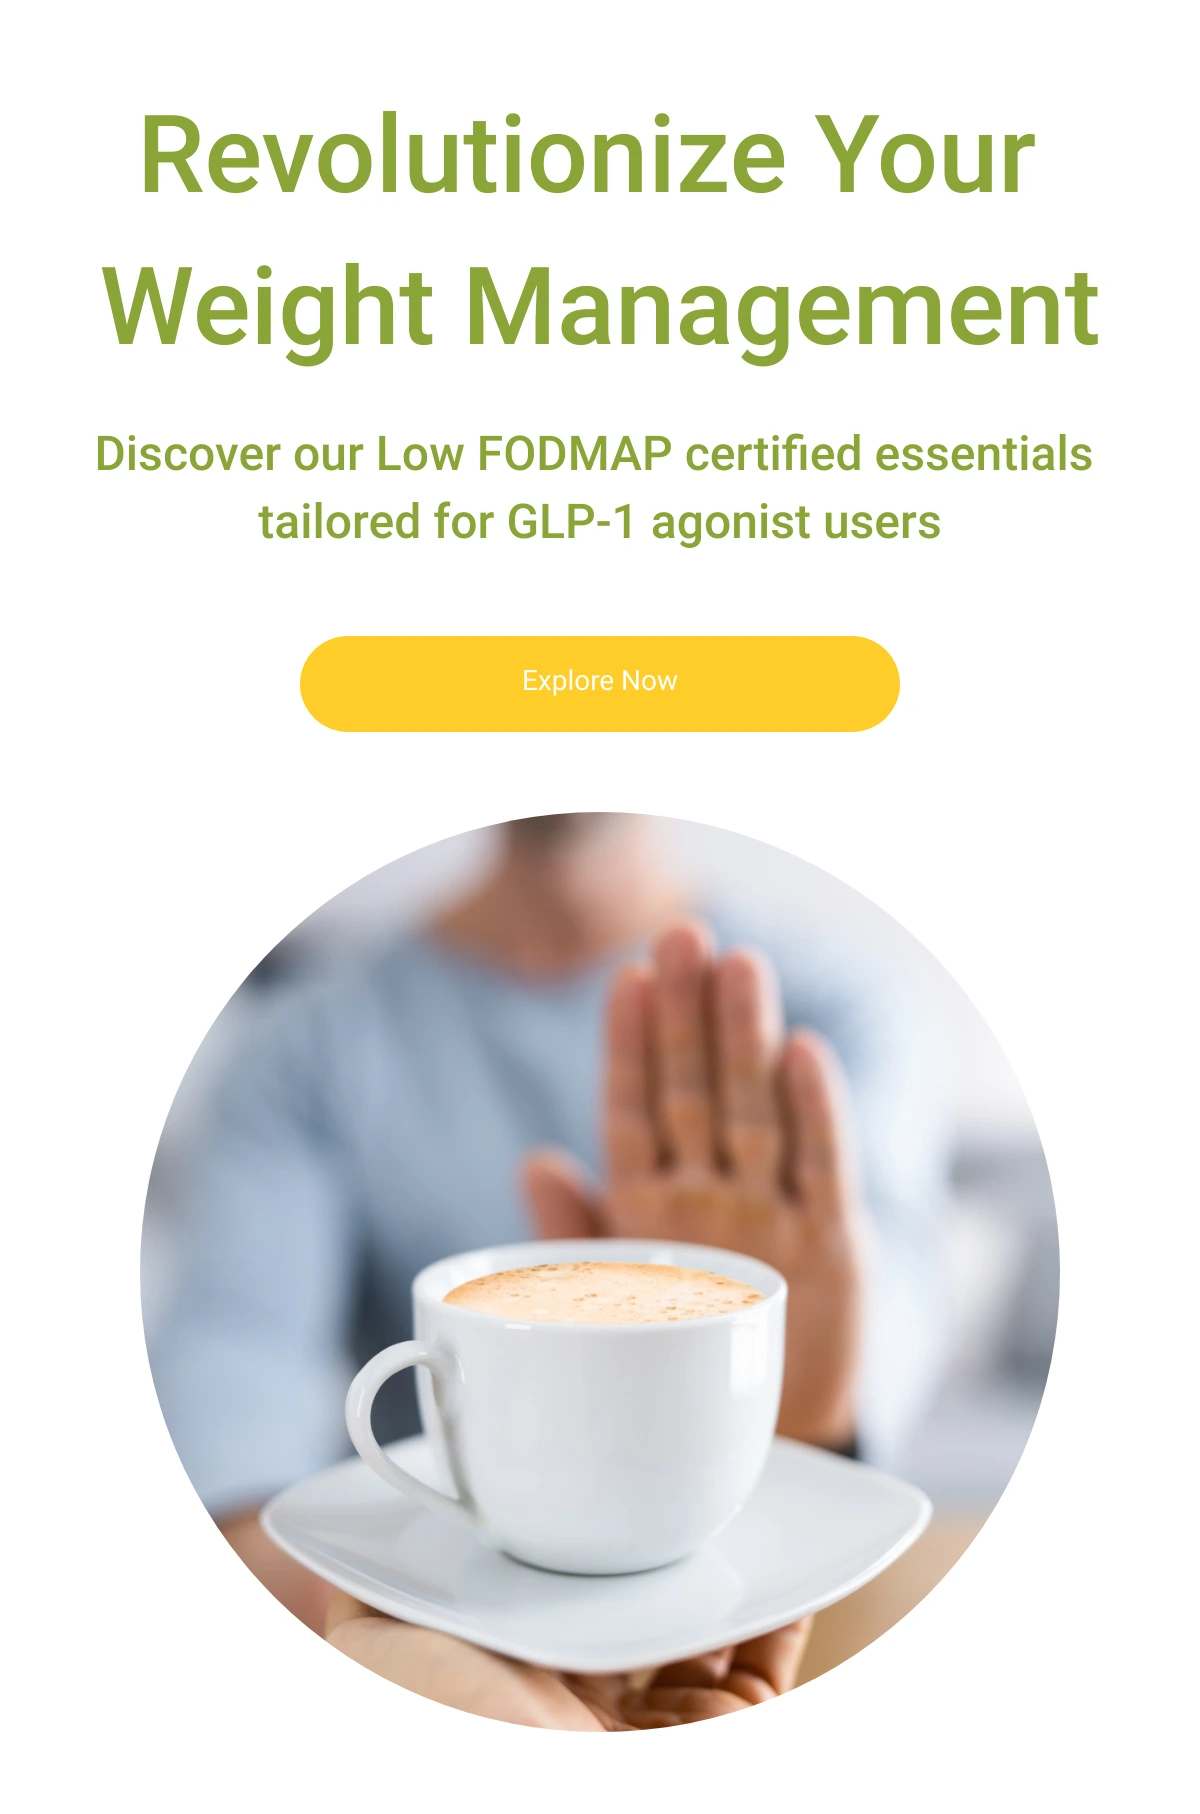  Revolutionize Your Weight Management Discover our Low FODMAP certified essentials tailored for GLP-1 agonist users Explore Now